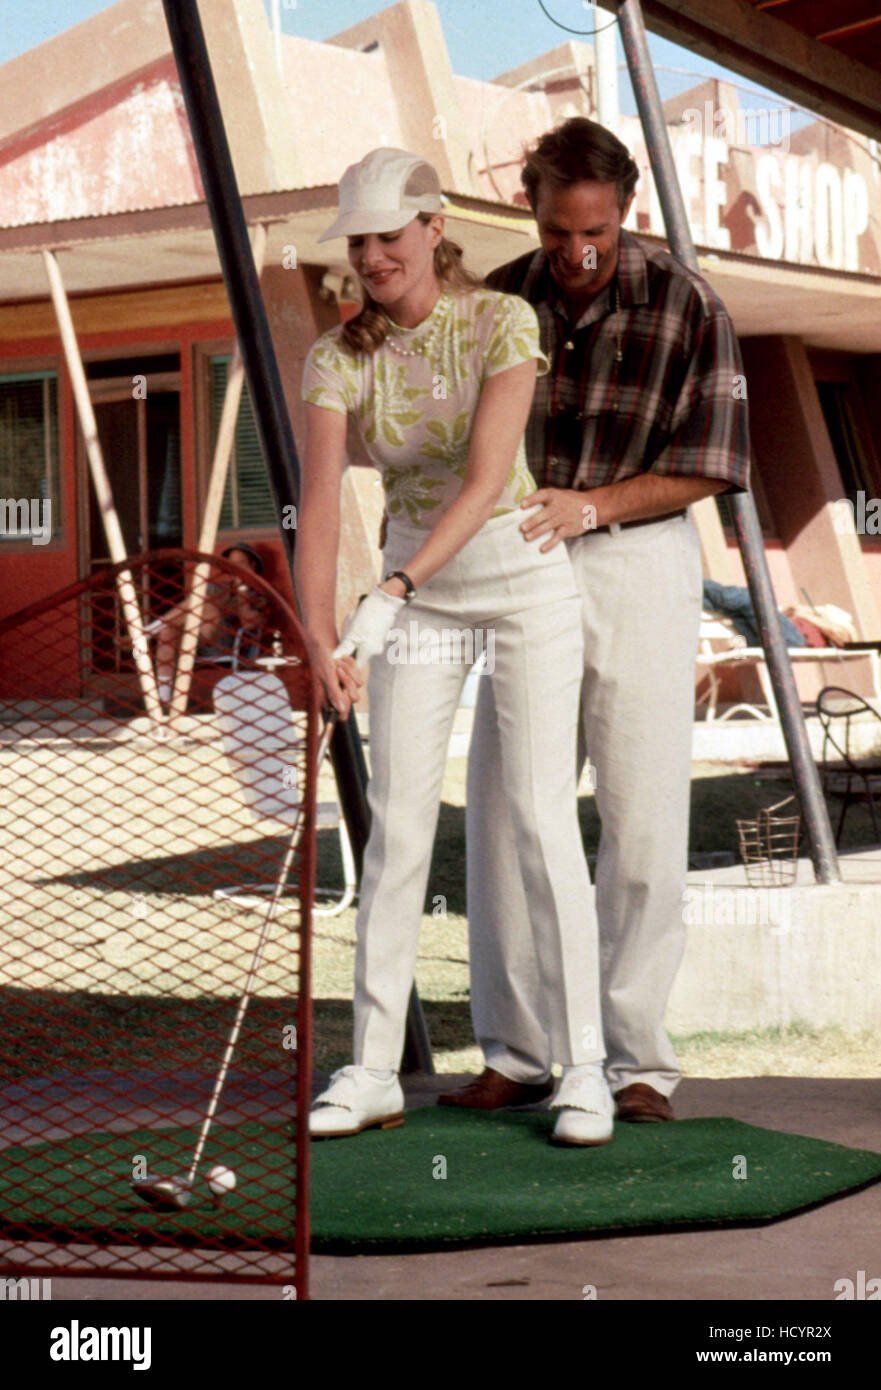 TIN CUP, Rene Russo, Kevin Costner, 1996, giving a golf lesson Stock Photo  - Alamy